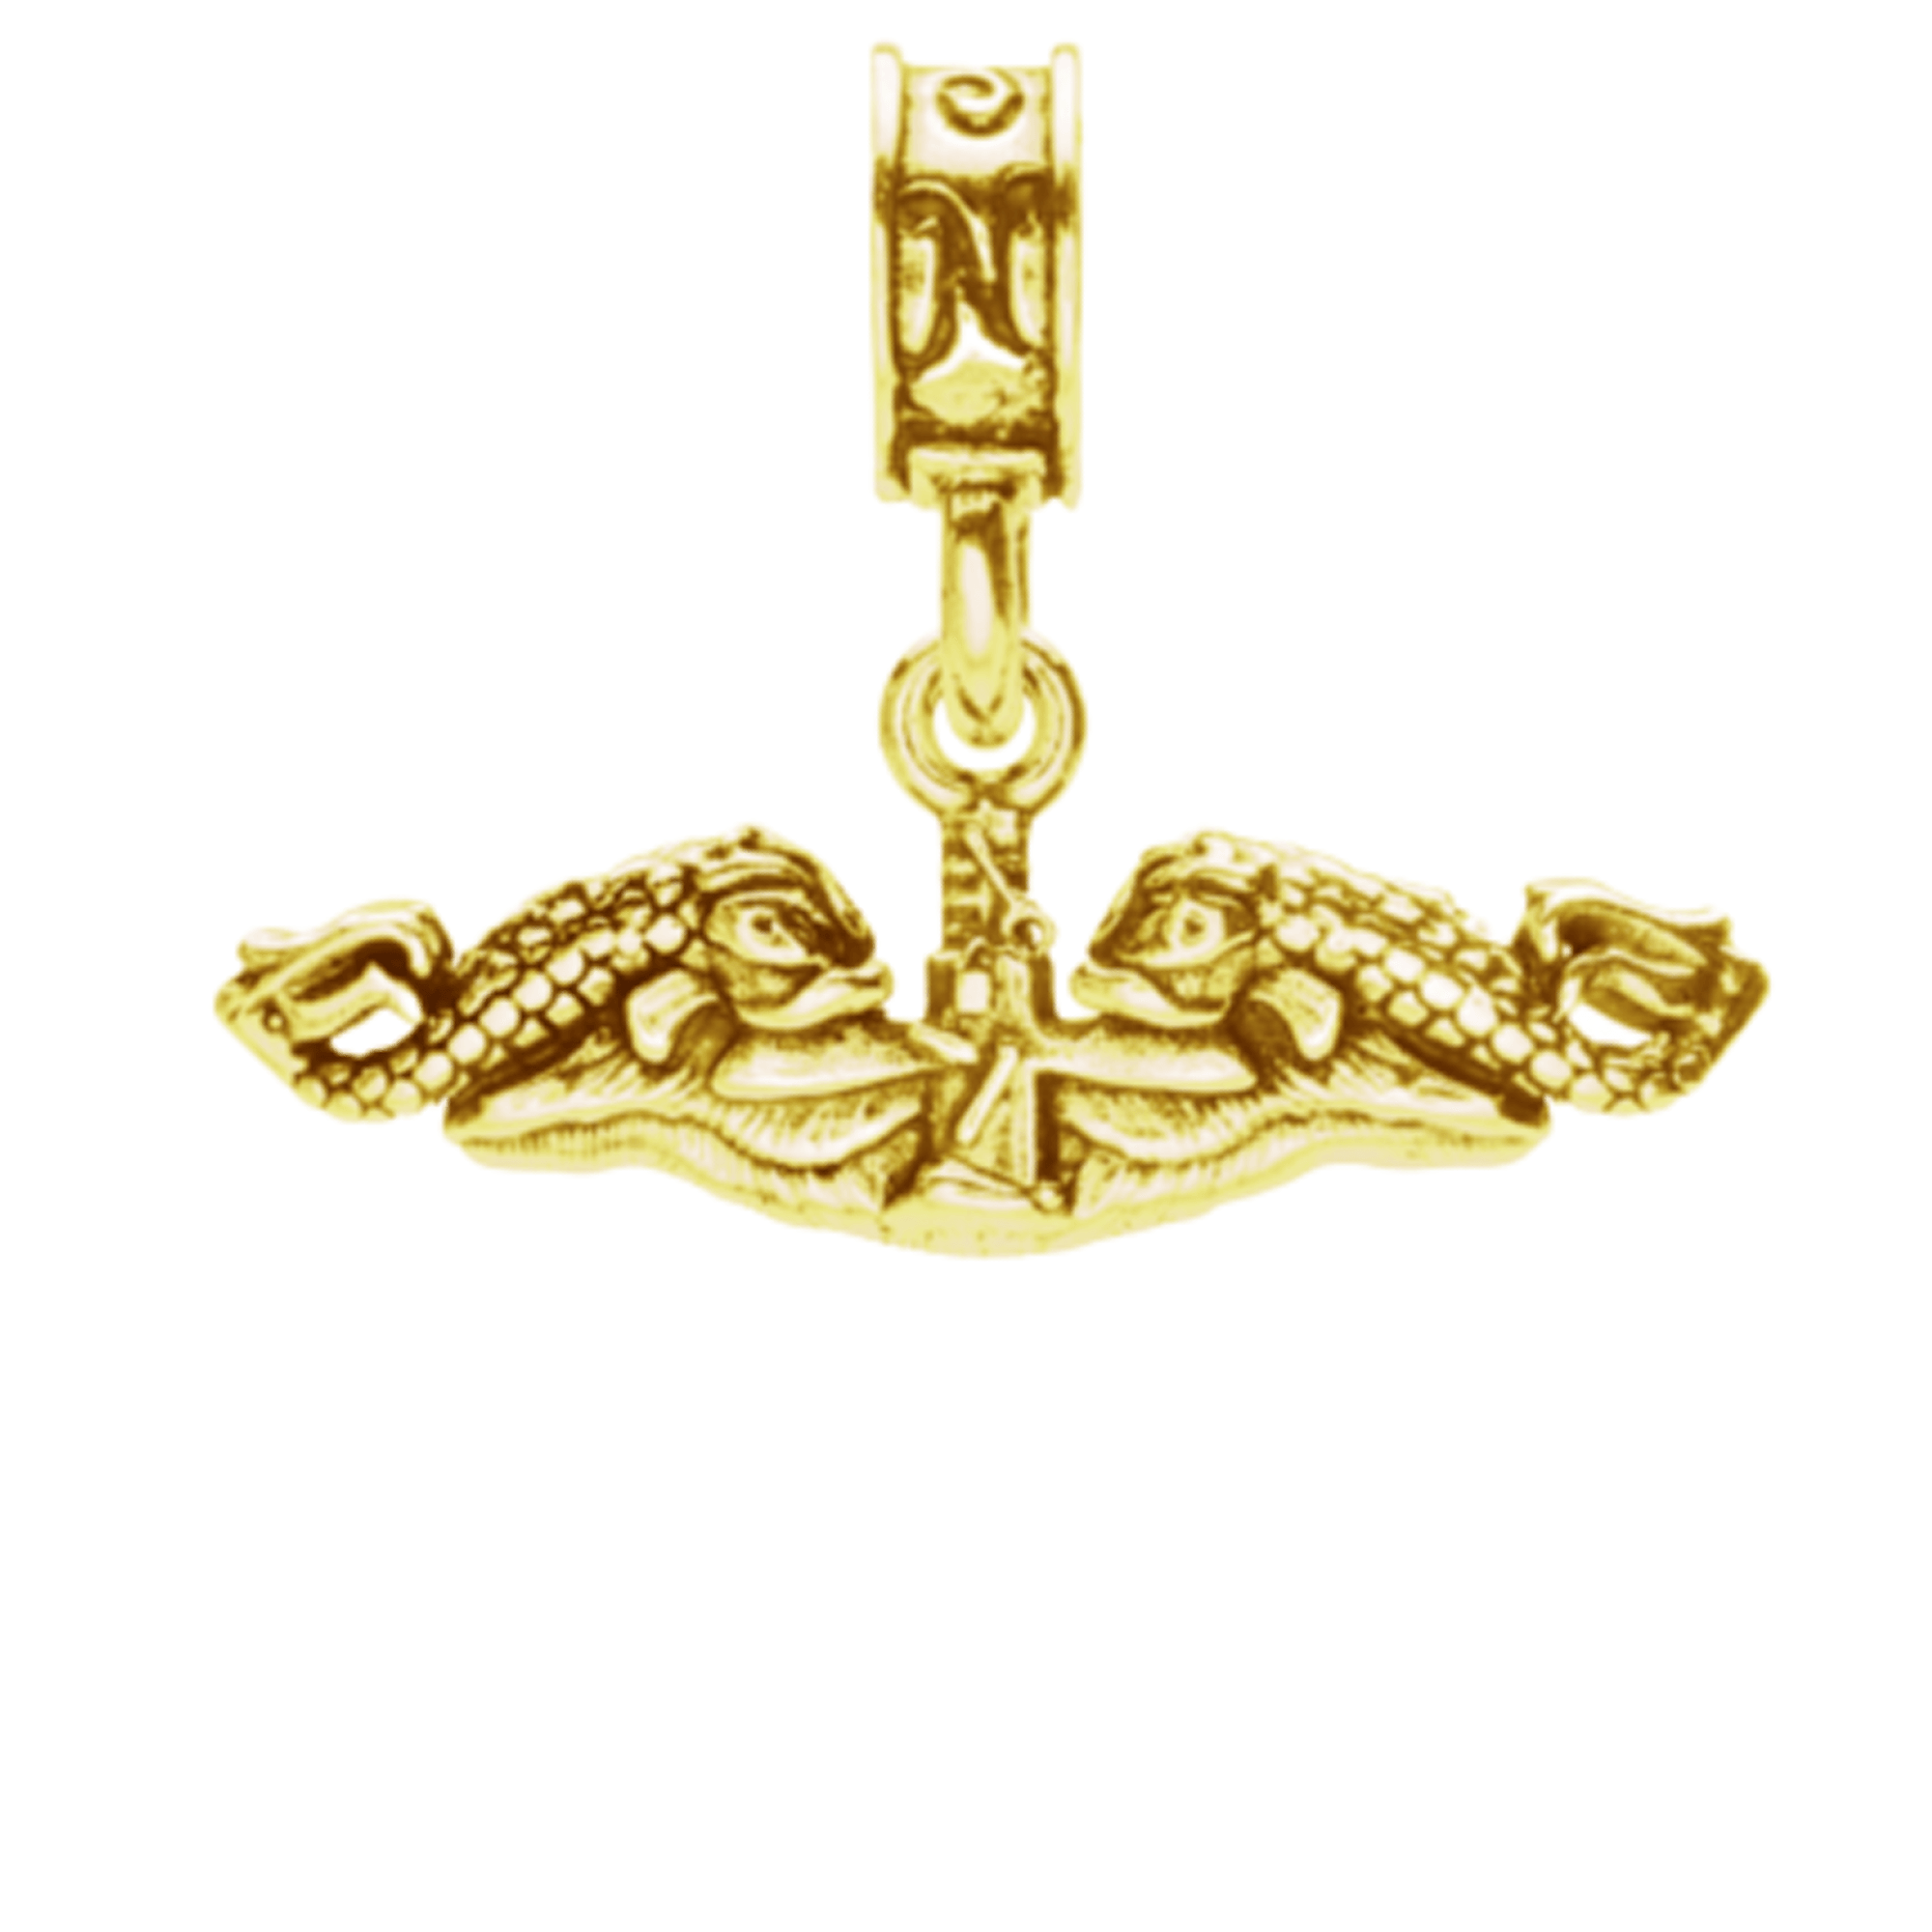 Military Jewelry, Military Charms, Navy, USN, Military Gifts, Sub Service Charm Gold, Navy Dolphin Charm Gold